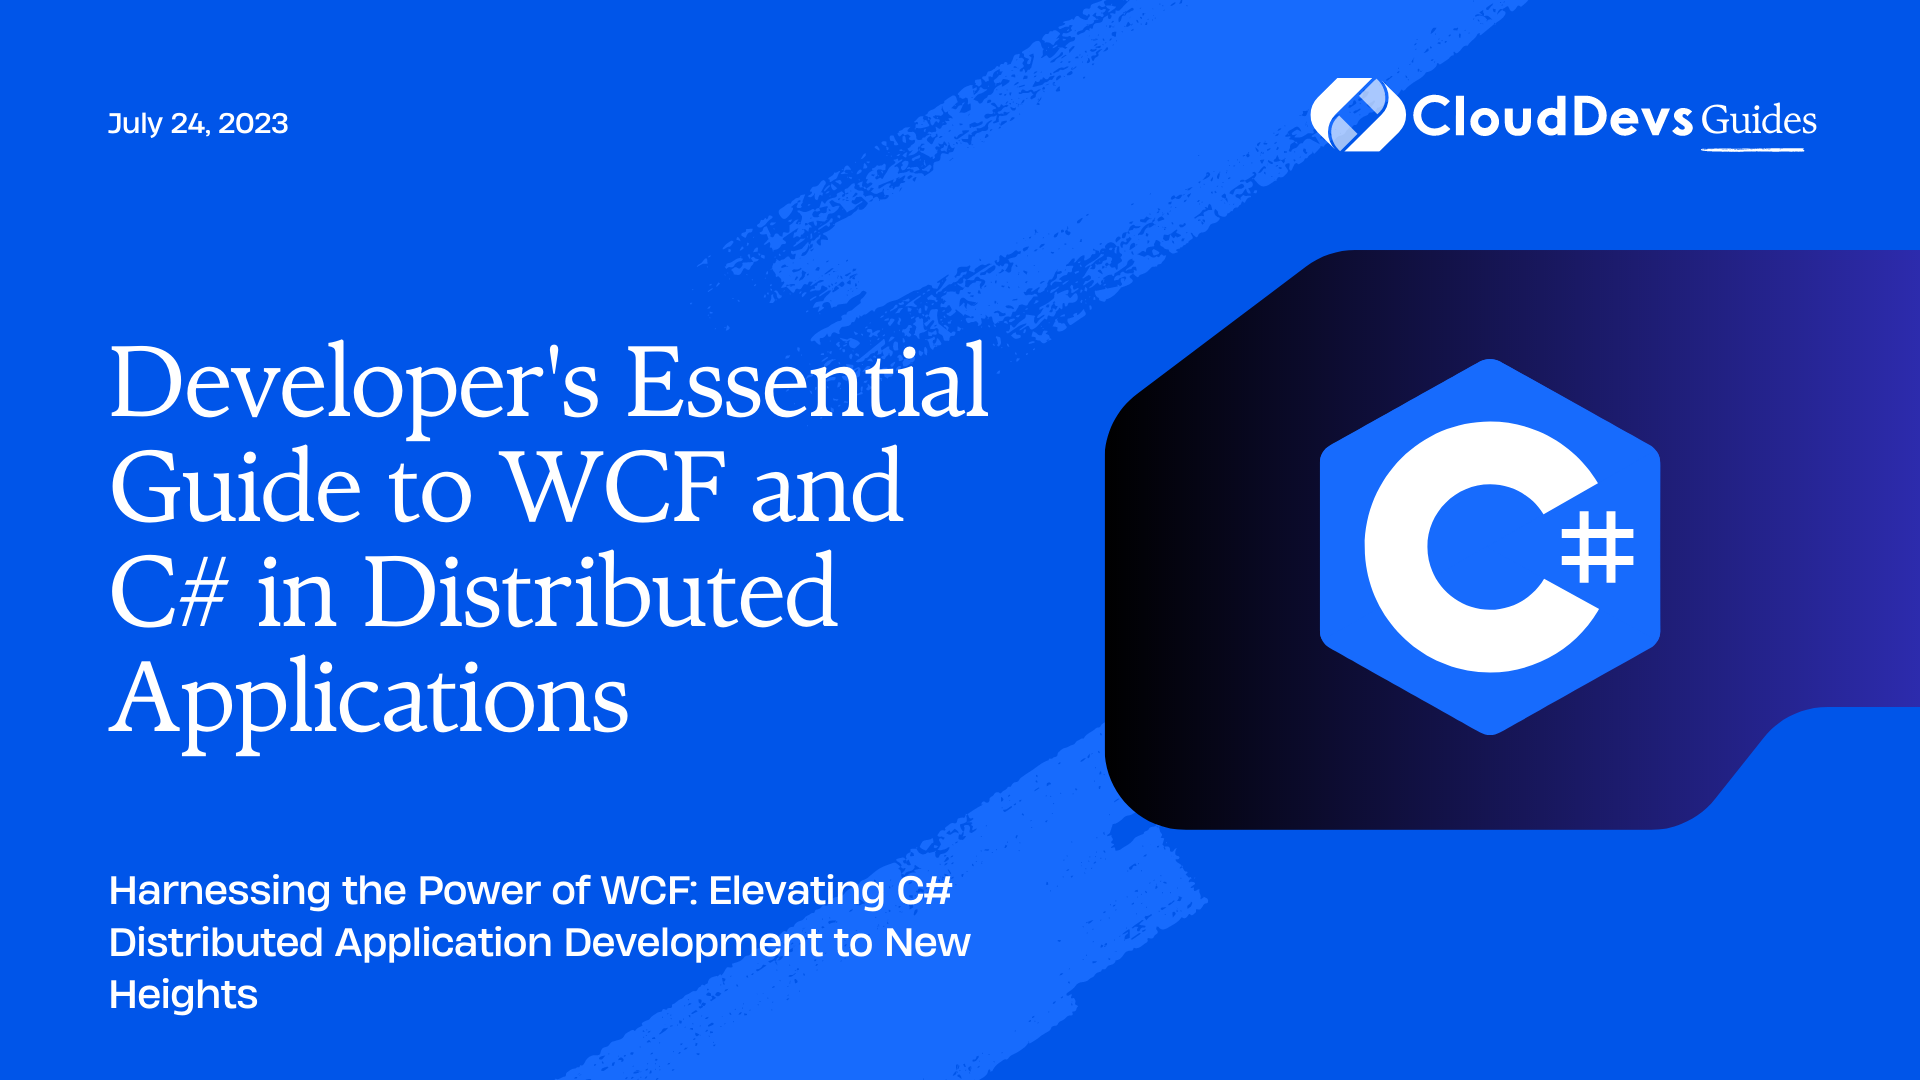 Developer's Essential Guide to WCF and C# in Distributed Applications